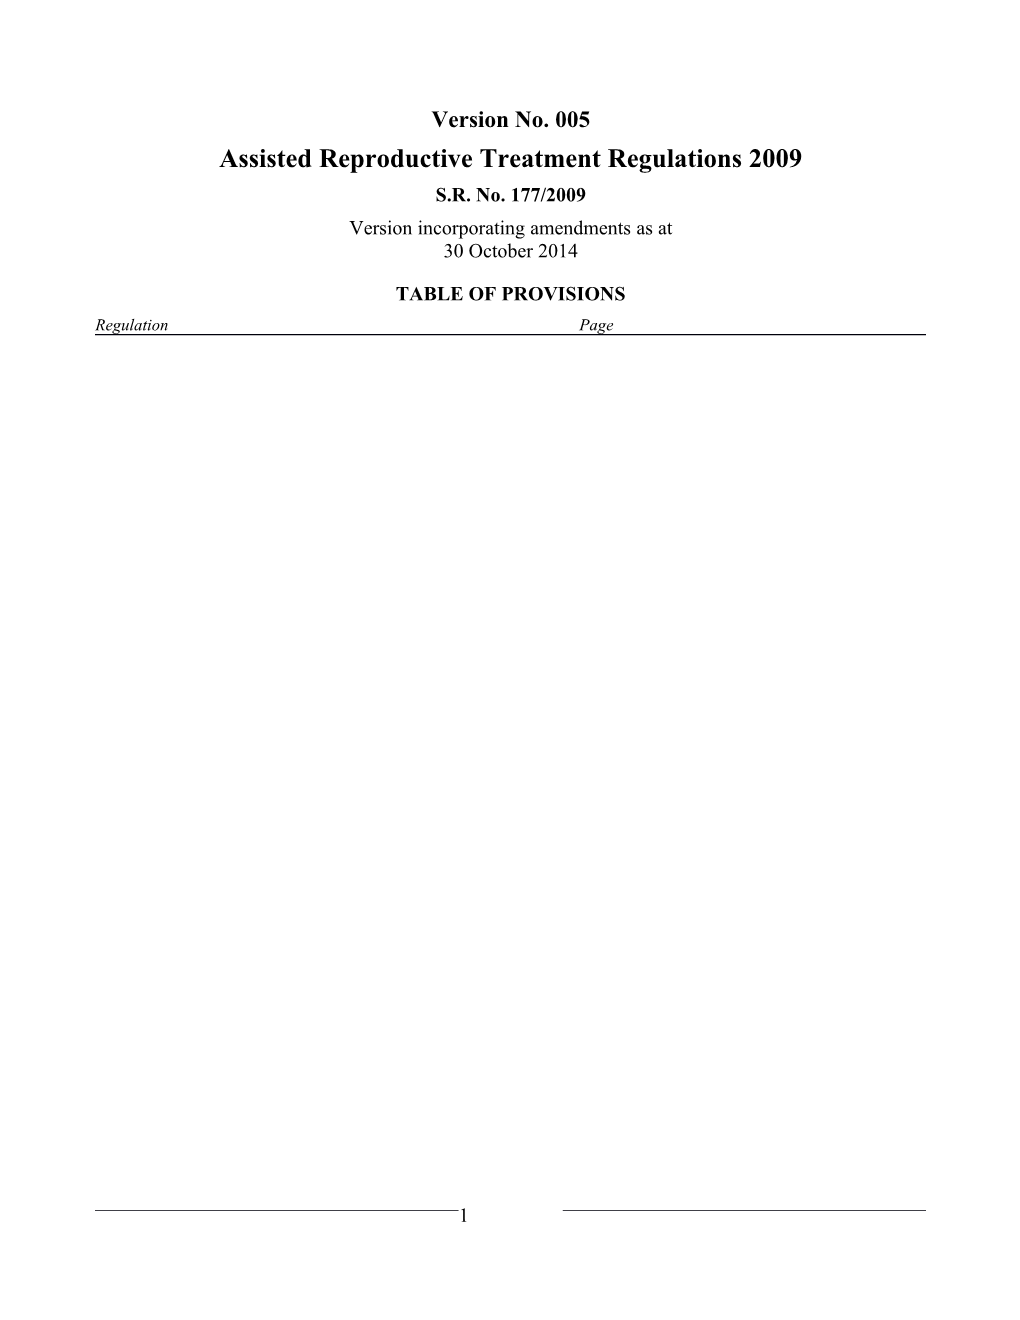 Assisted Reproductive Treatment Regulations 2009